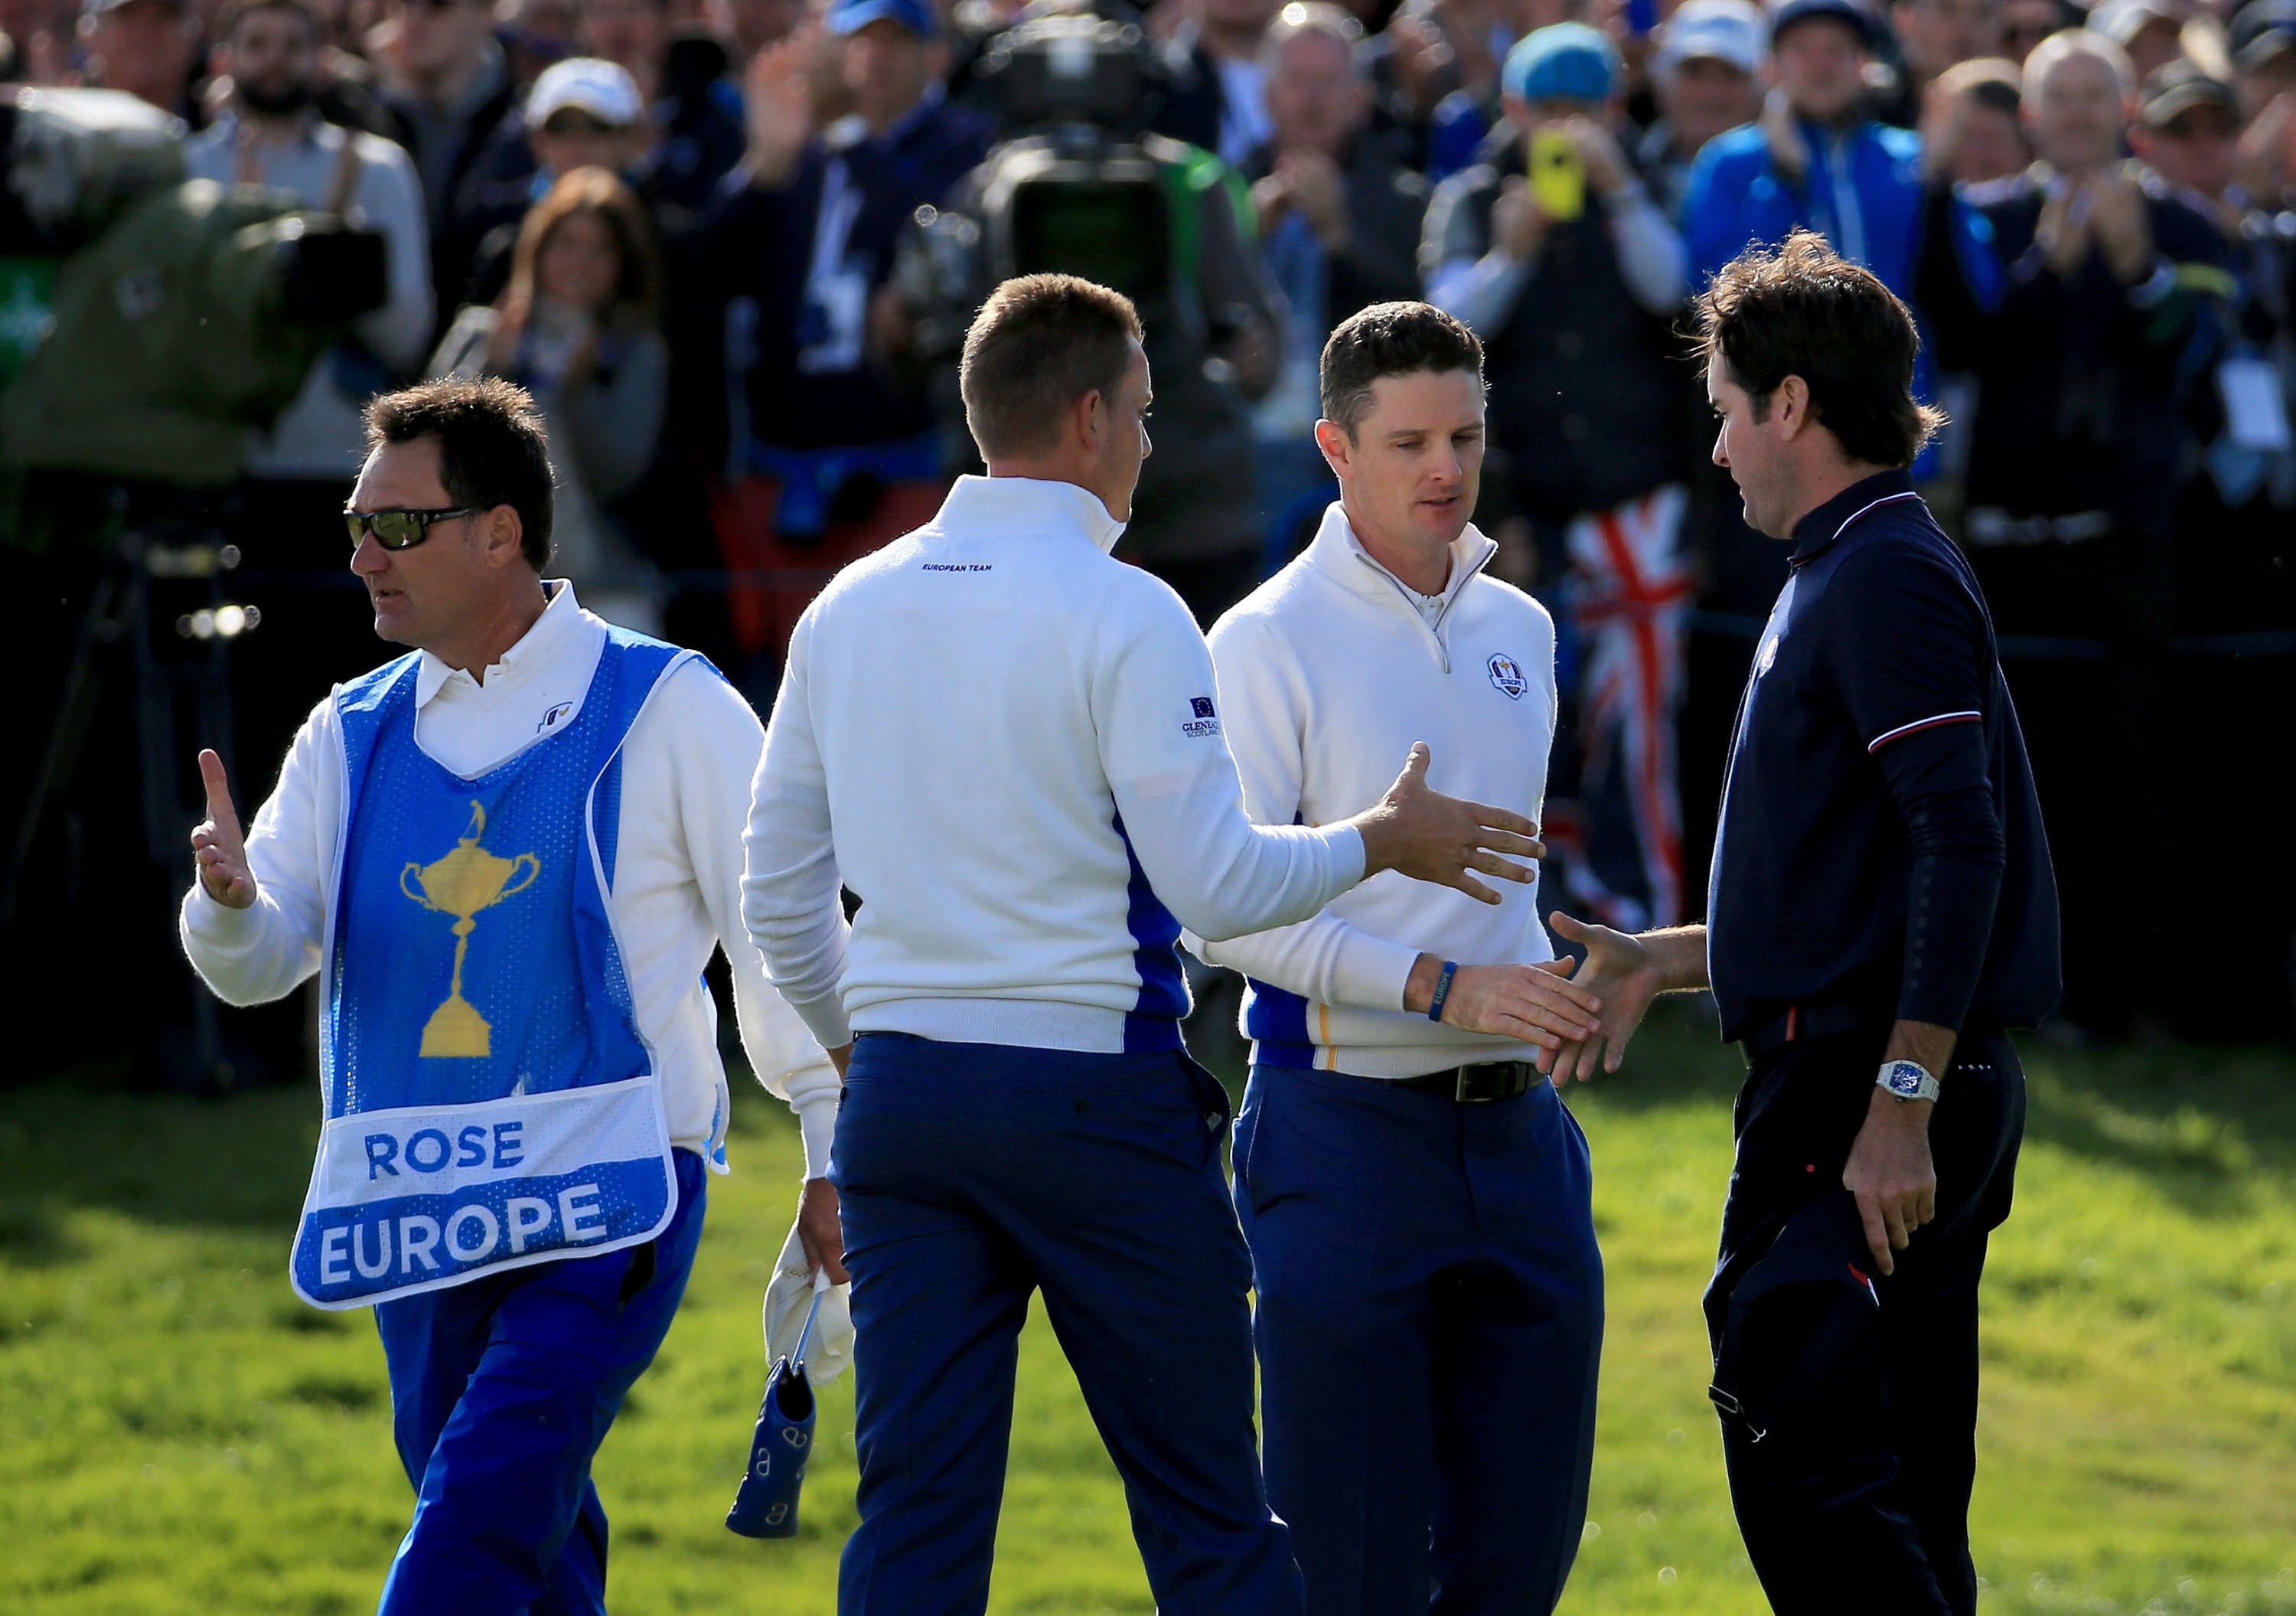 AUCHTERARDER, SCOTLAND - SEPTEMBER 27:  Henrik Stenson and Justin Rose of Europe shake hands with Bubba Watson of the United States after winning their match on the 16th green during the Morning Fourballs of the 2014 Ryder Cup on the PGA Centenary course at the Gleneagles Hotel on September 27, 2014 in Auchterarder, Scotland.  (Photo by David Cannon/Getty Images)